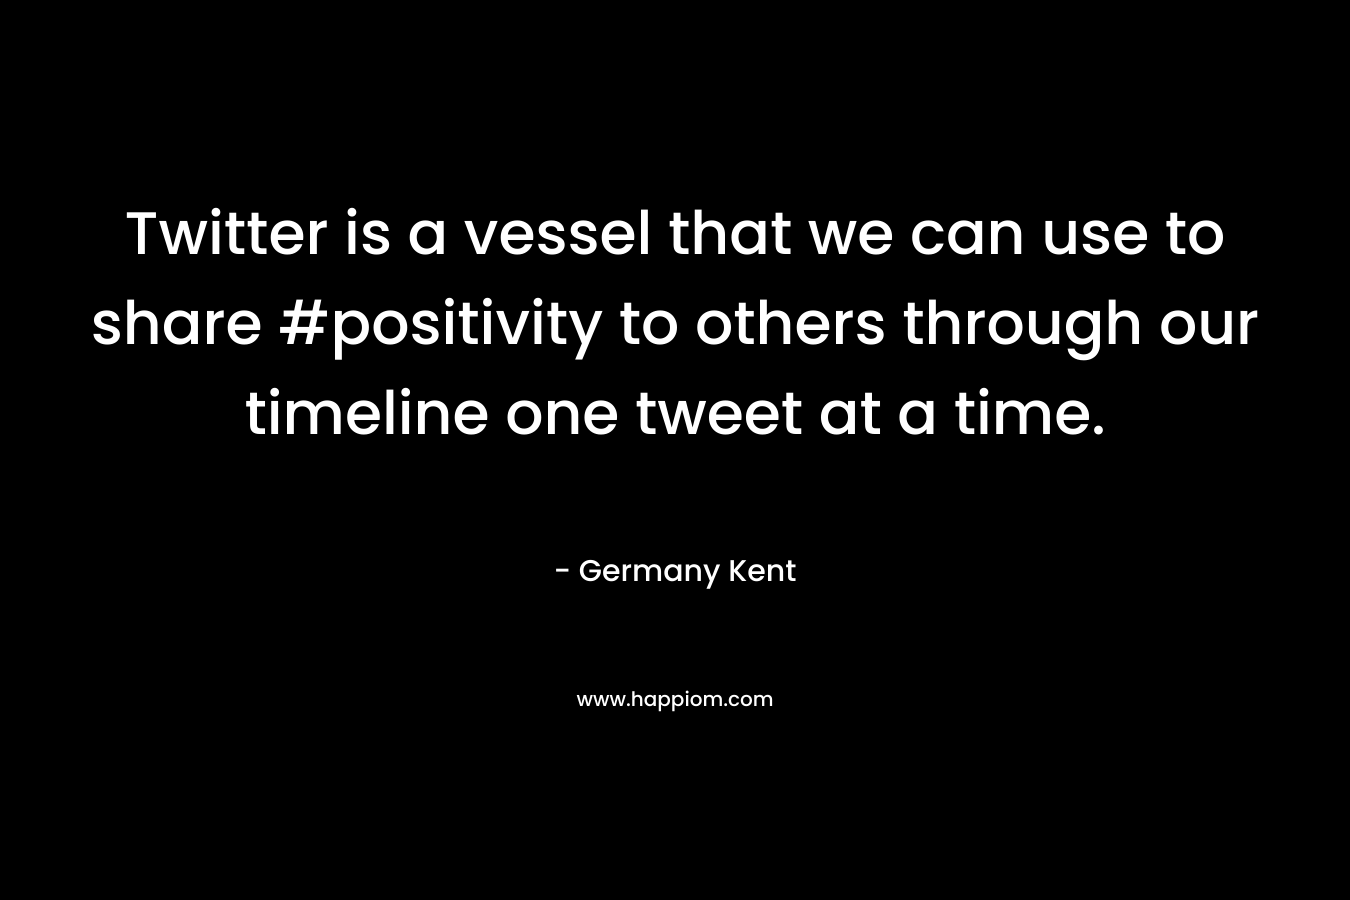 Twitter is a vessel that we can use to share #positivity to others through our timeline one tweet at a time.